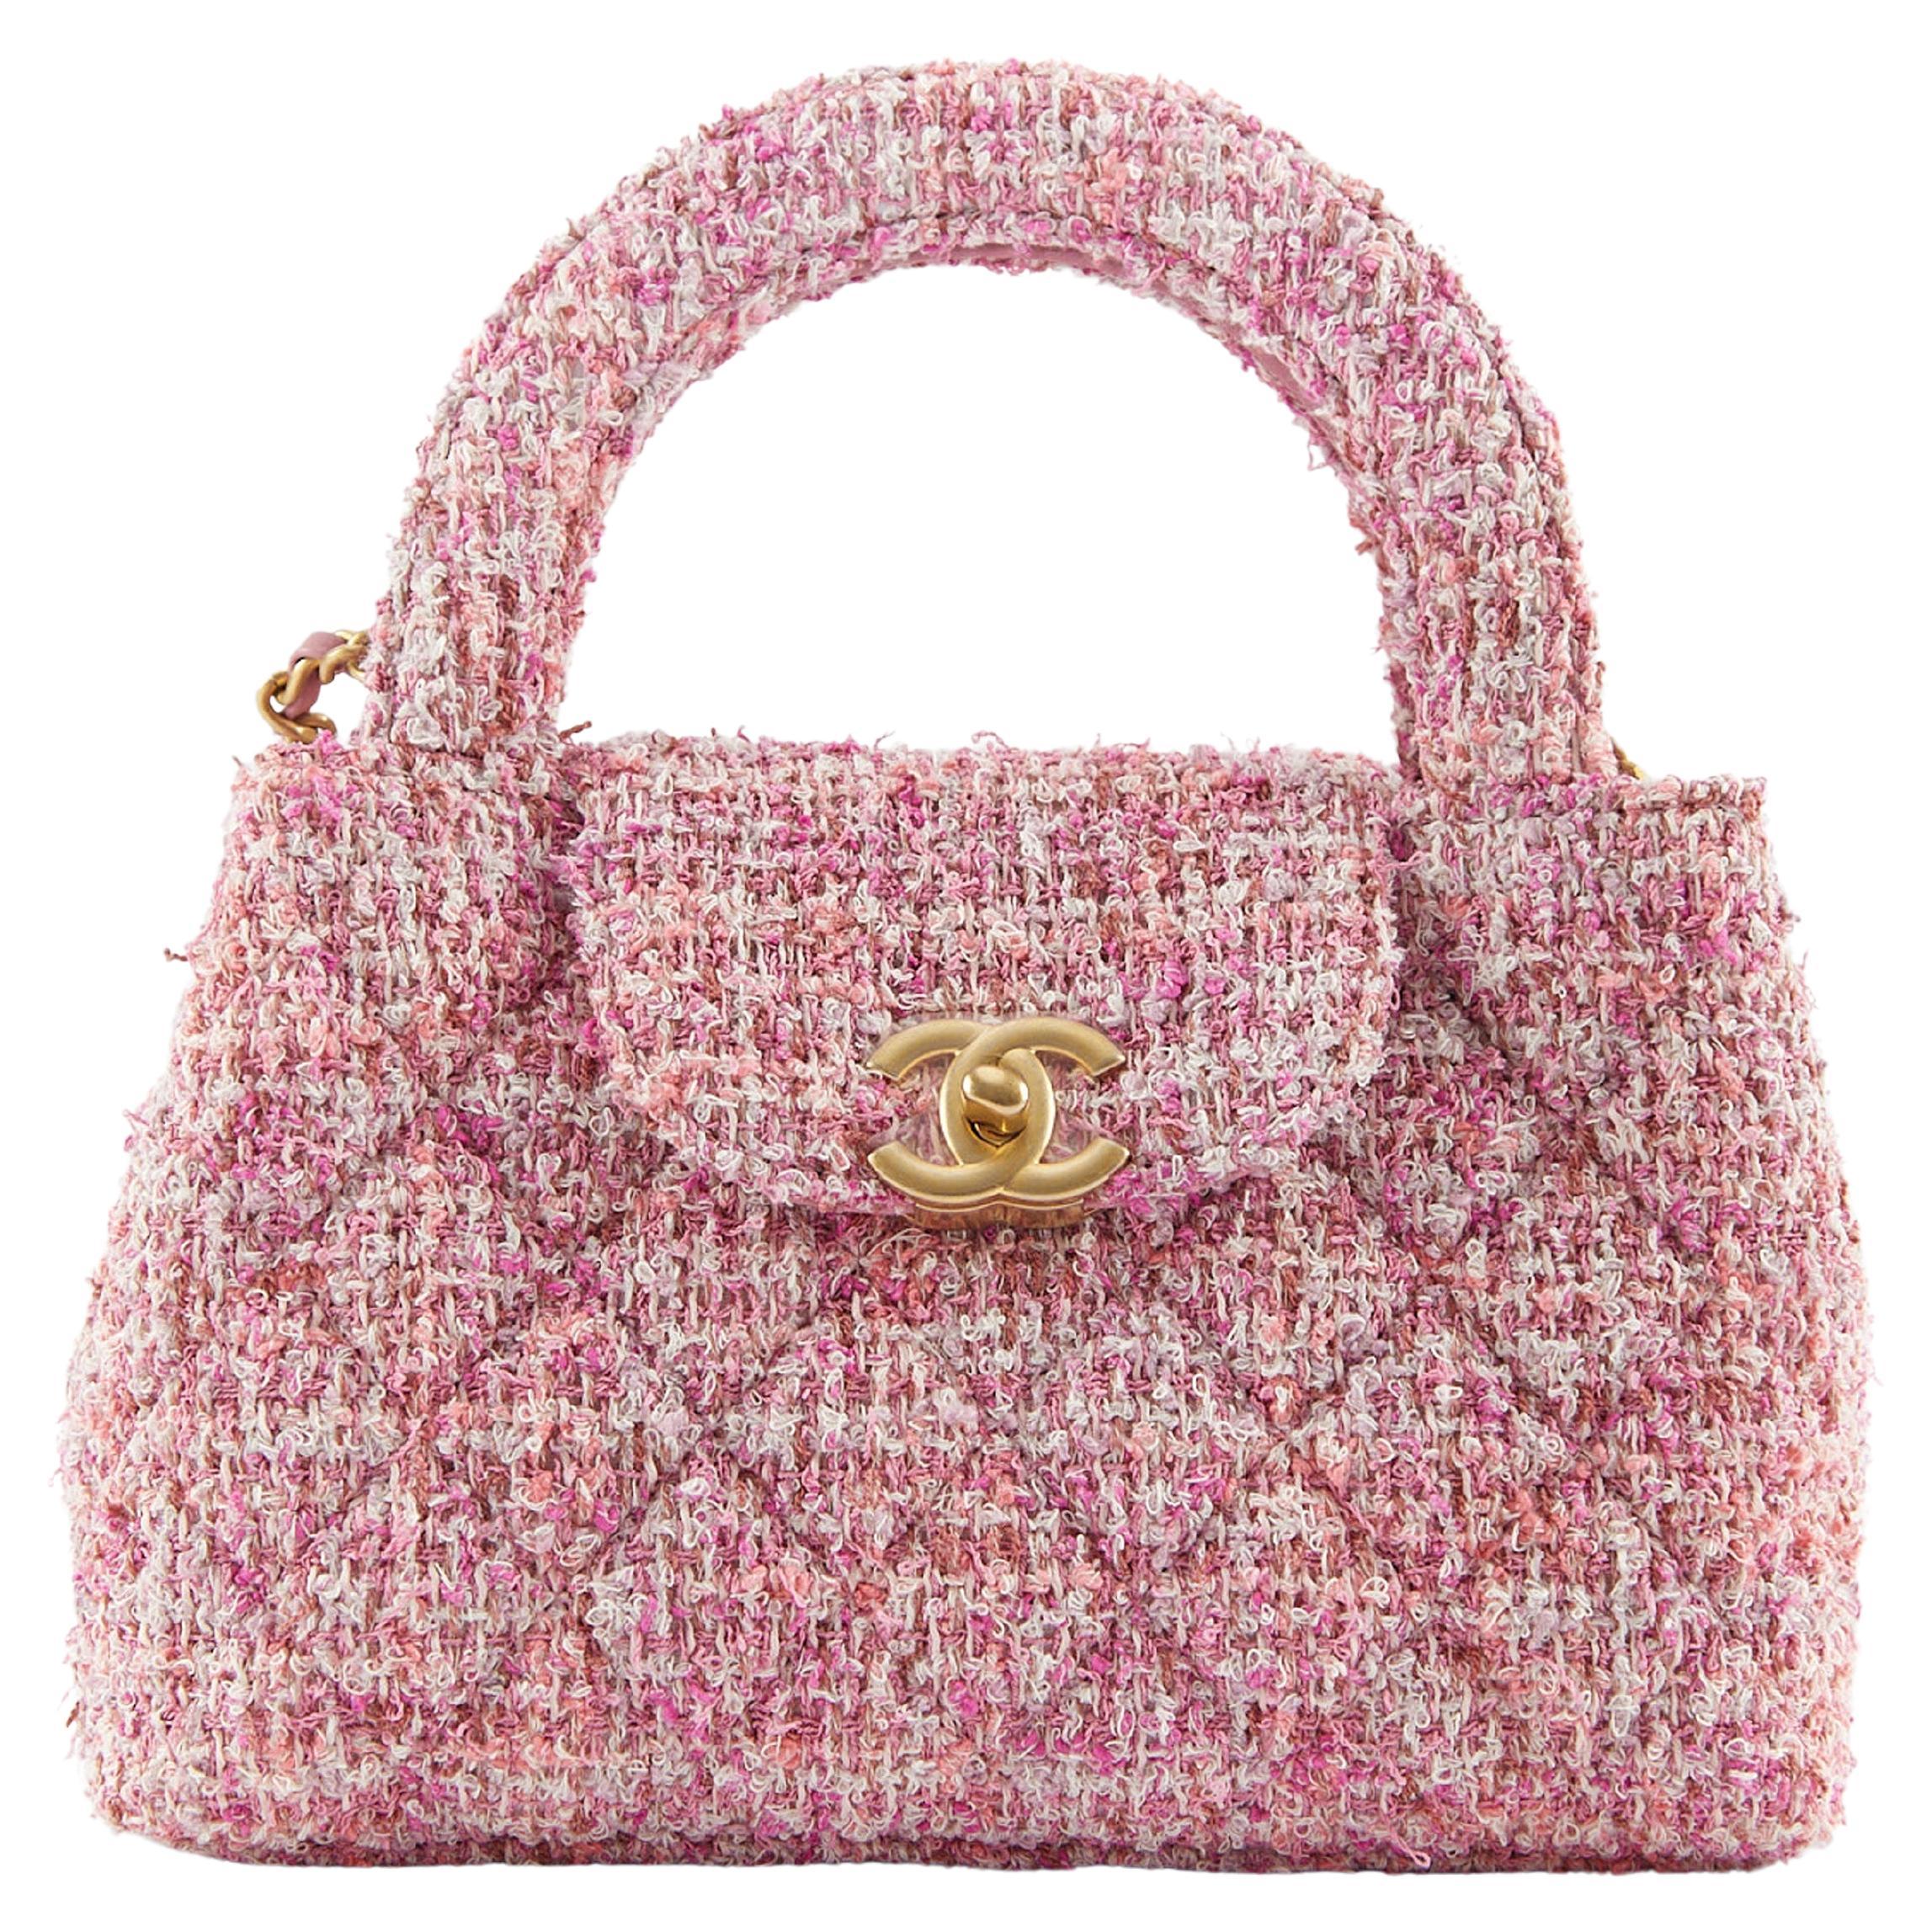 CHANEL SMALL "KELLY" BAG PINK & ECRU Tweed with Gold-Tone Hardware For Sale